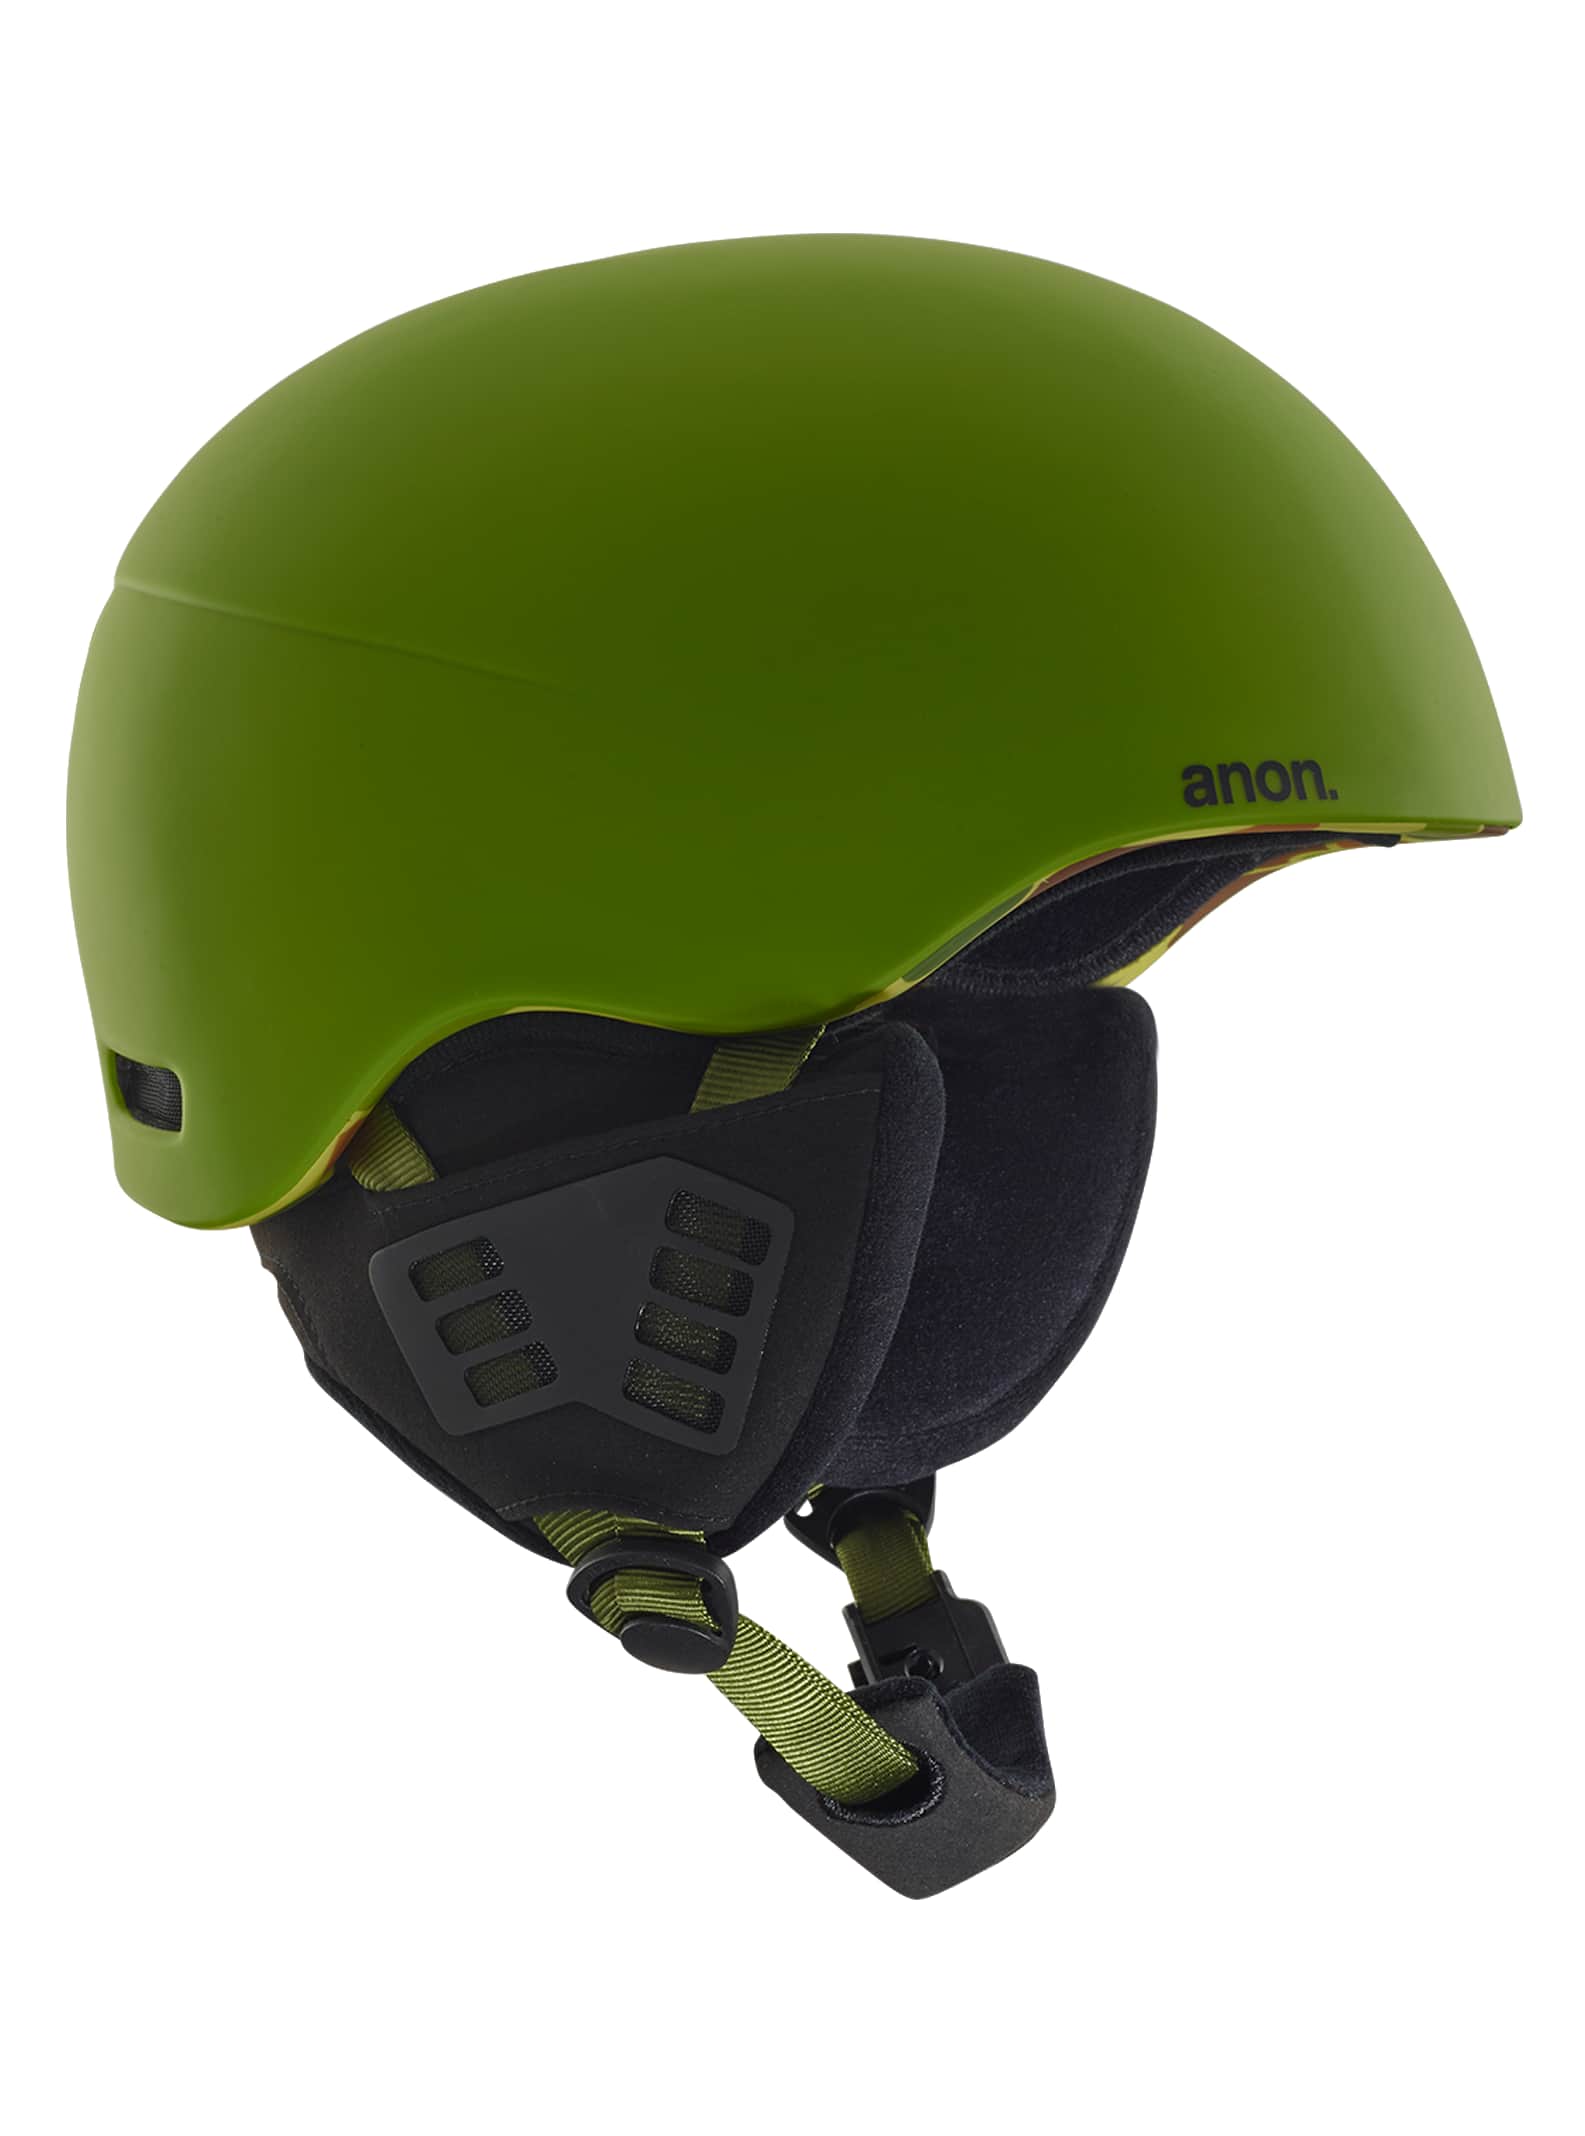 Anon - Casque Helo 2,0 homme, Green, L